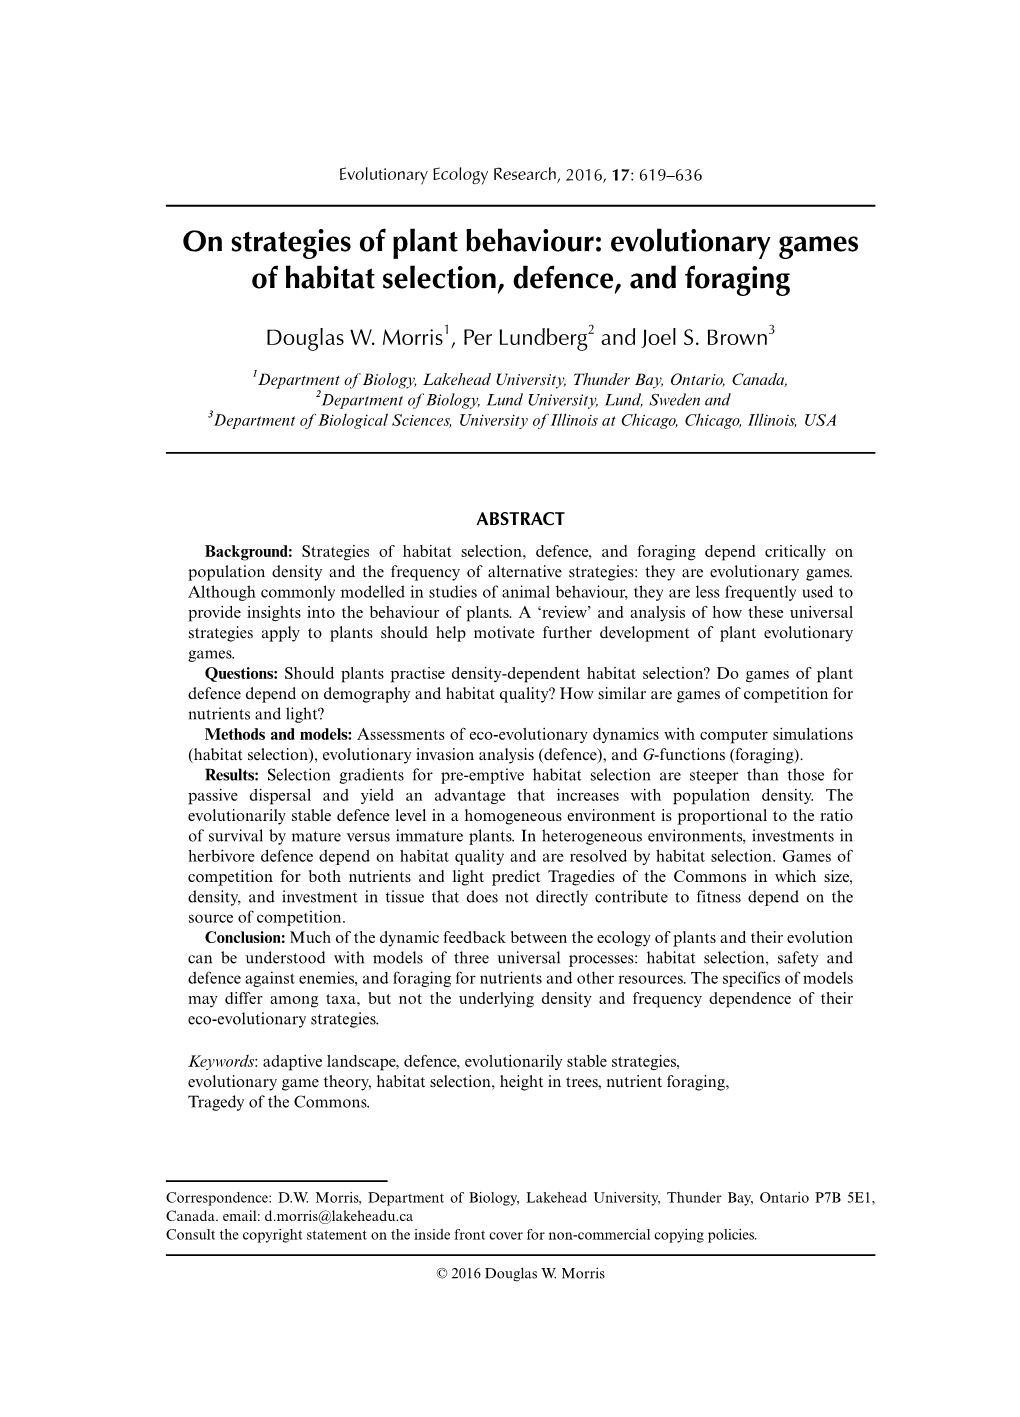 Evolutionary Games of Habitat Selection, Defence, and Foraging